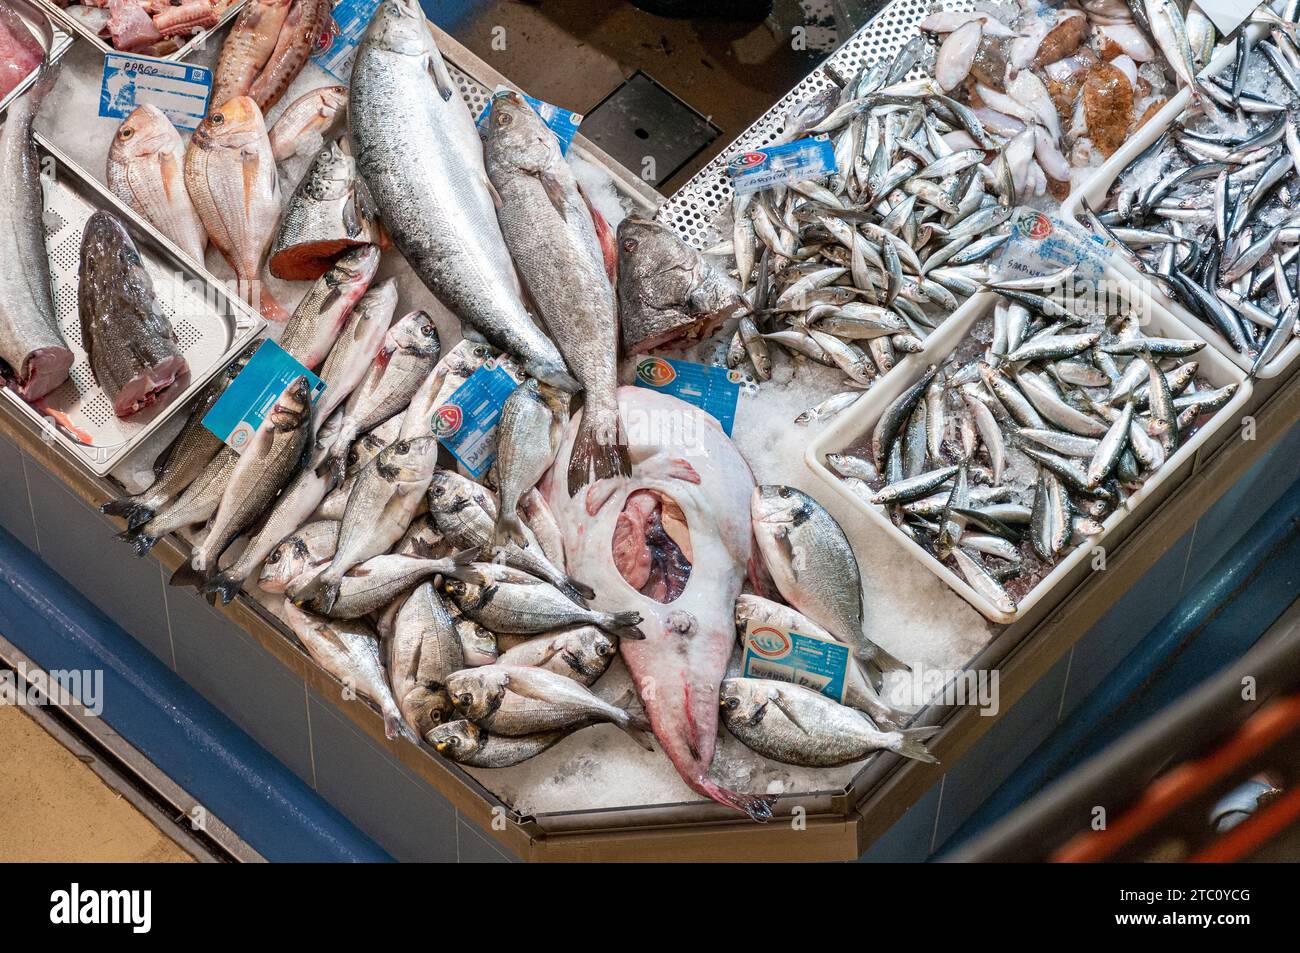 Stand with different varieties of fish at a fish market, Figueira da Foz, Portugal Stock Photo